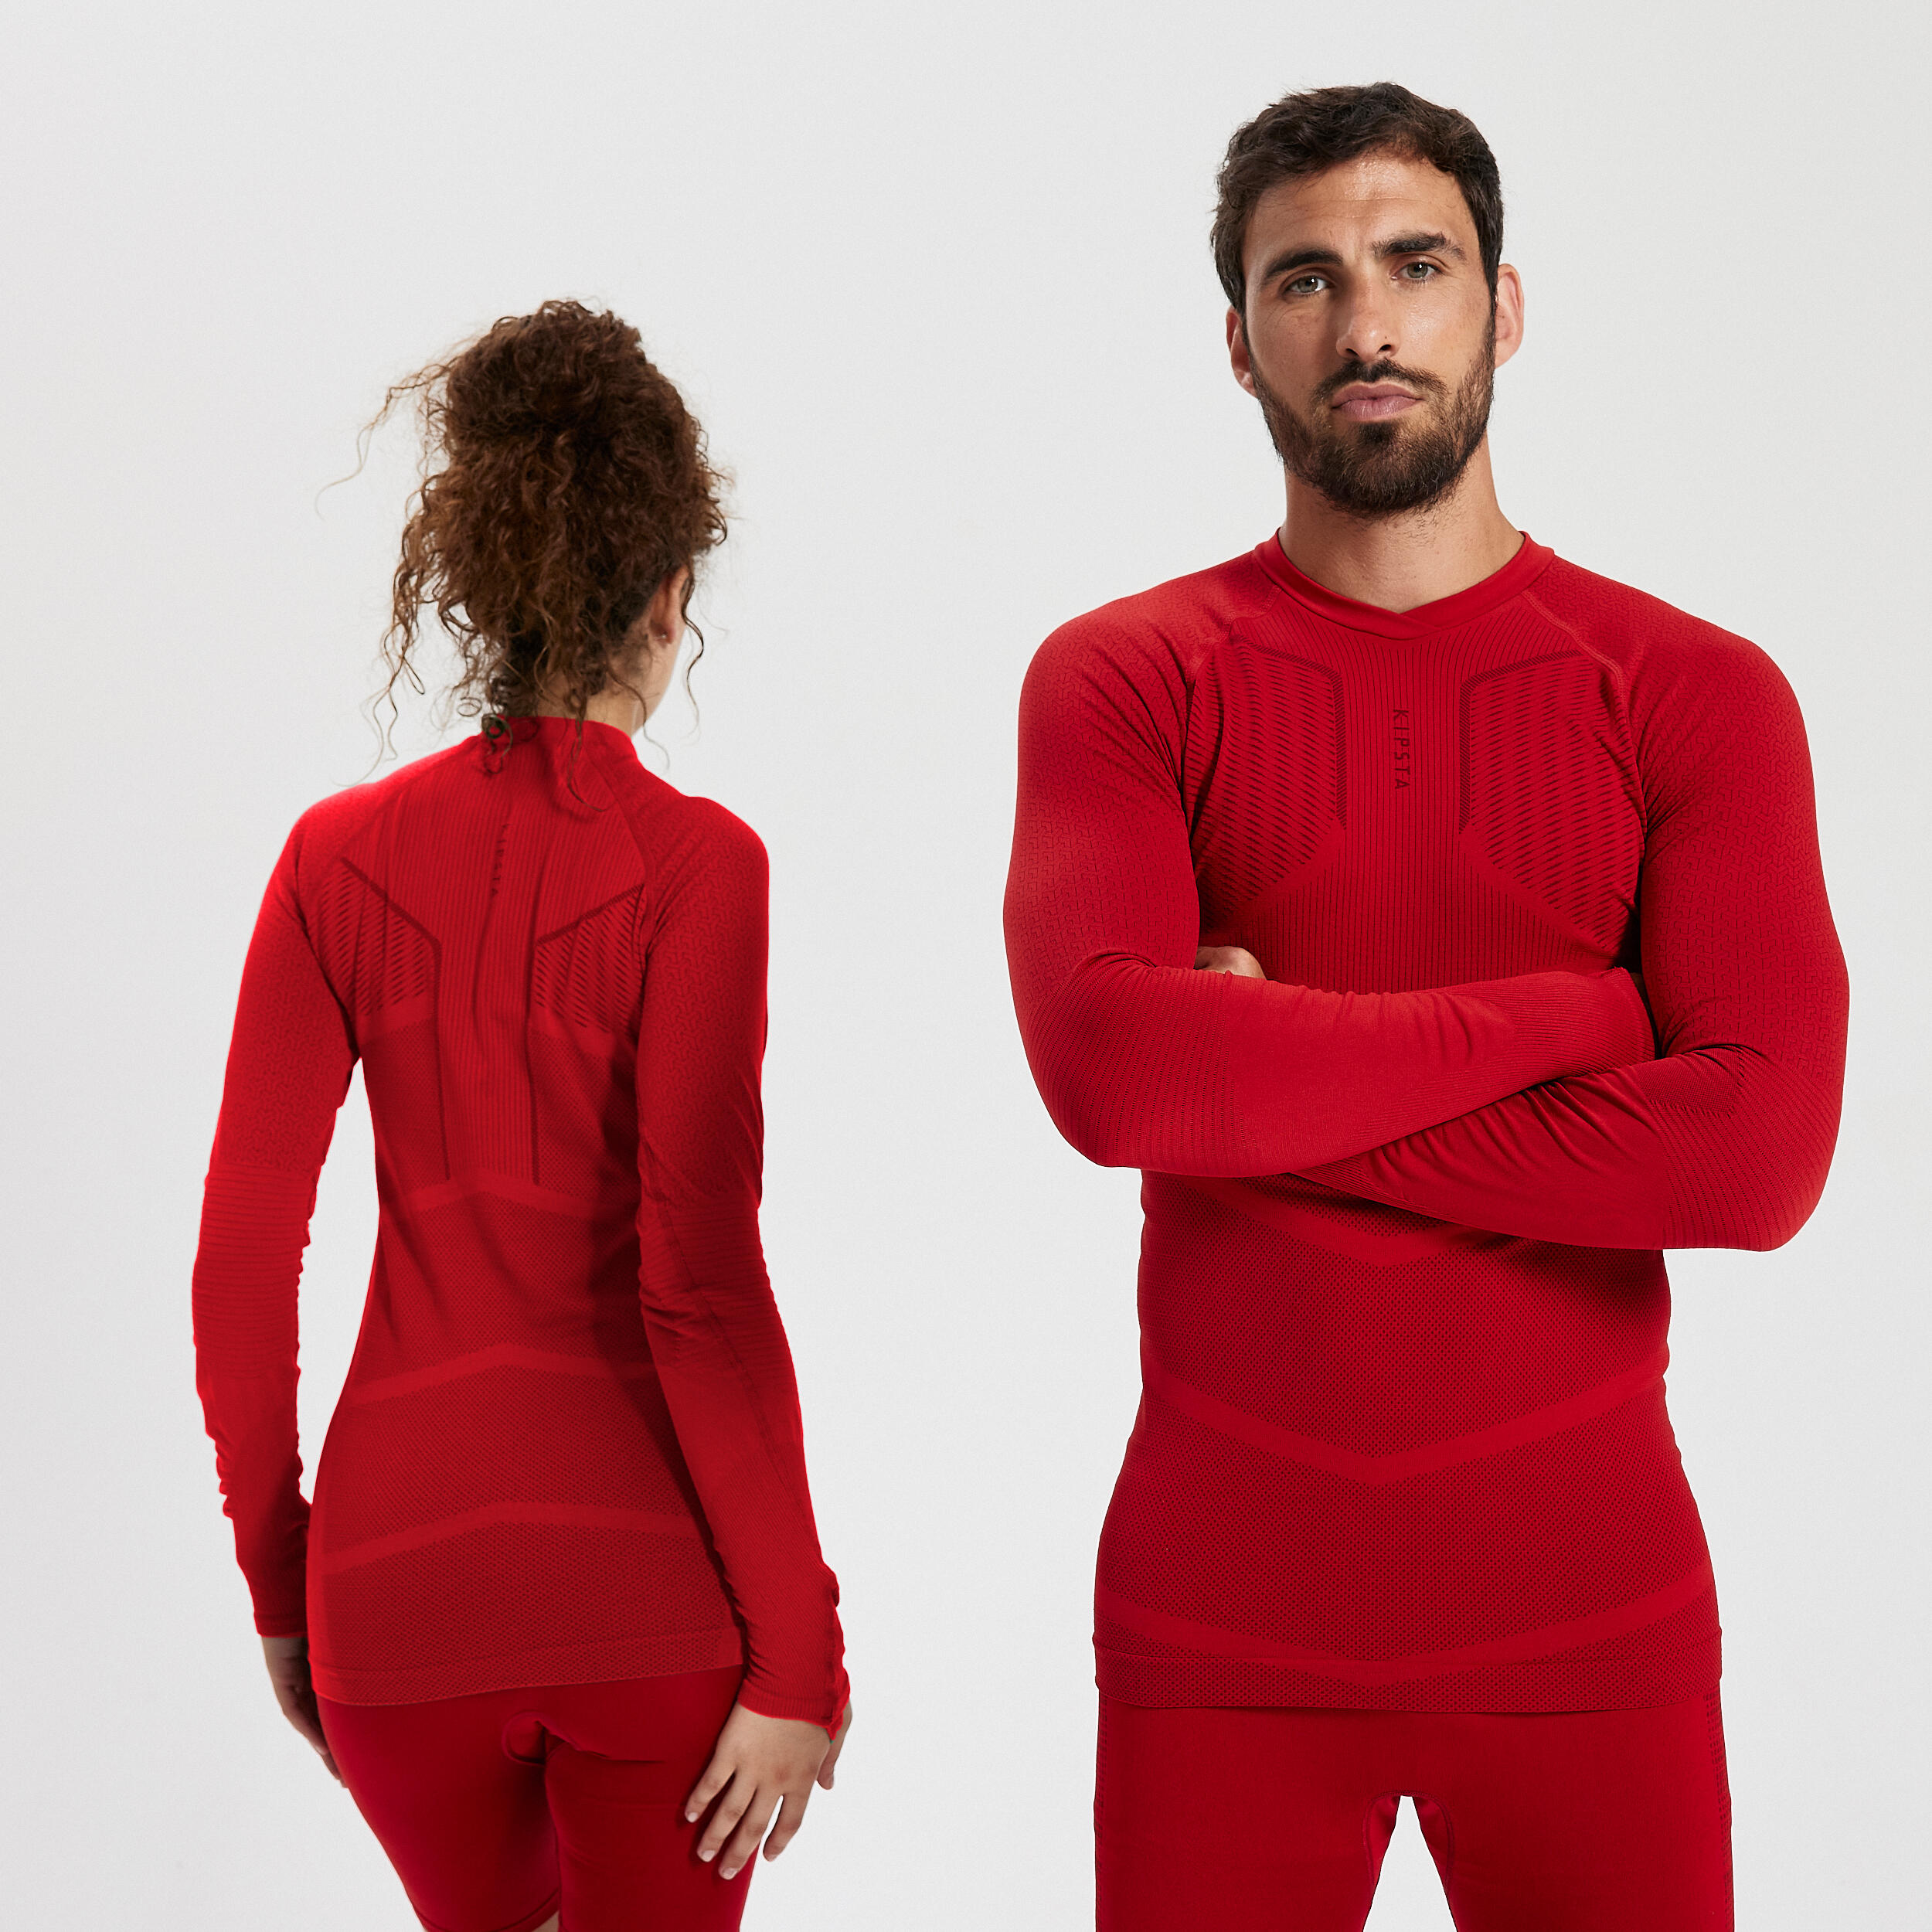 Adult Long-Sleeved Thermal Base Layer Top Keepdry 500 - Red 5/15